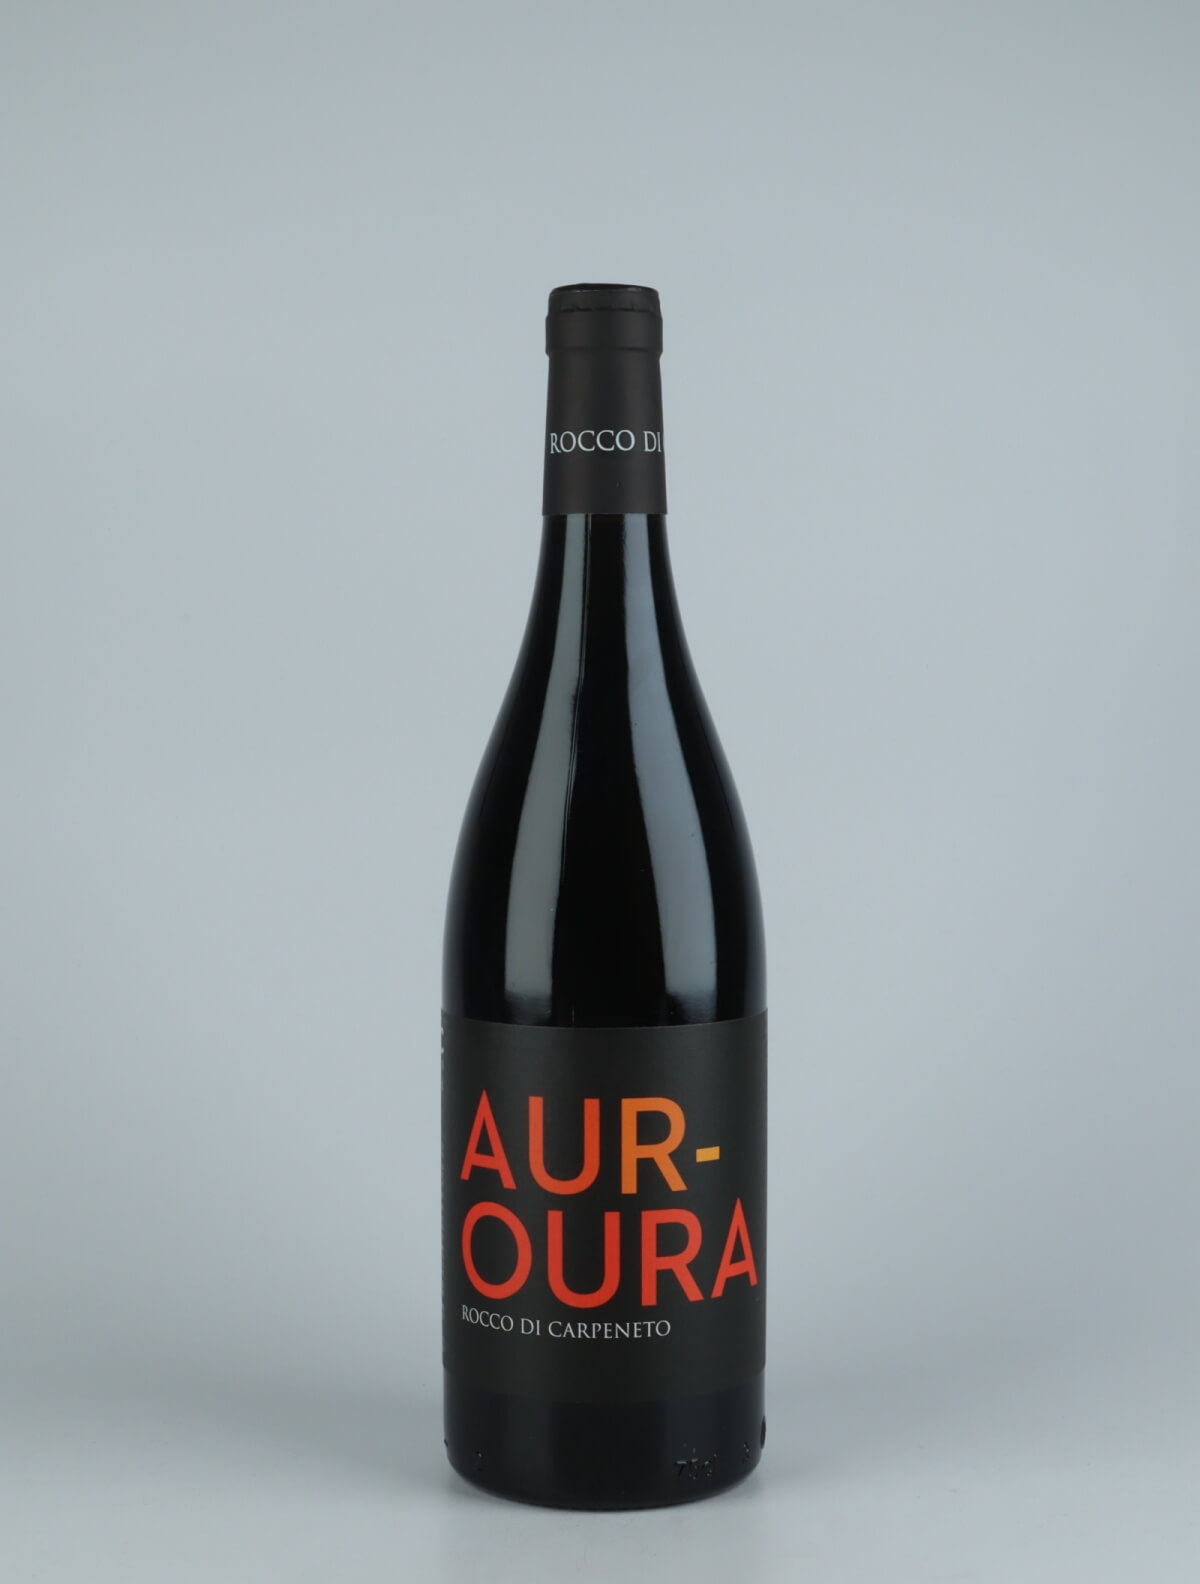 A bottle 2019 Aur-Oura Red wine from Rocco di Carpeneto, Piedmont in Italy